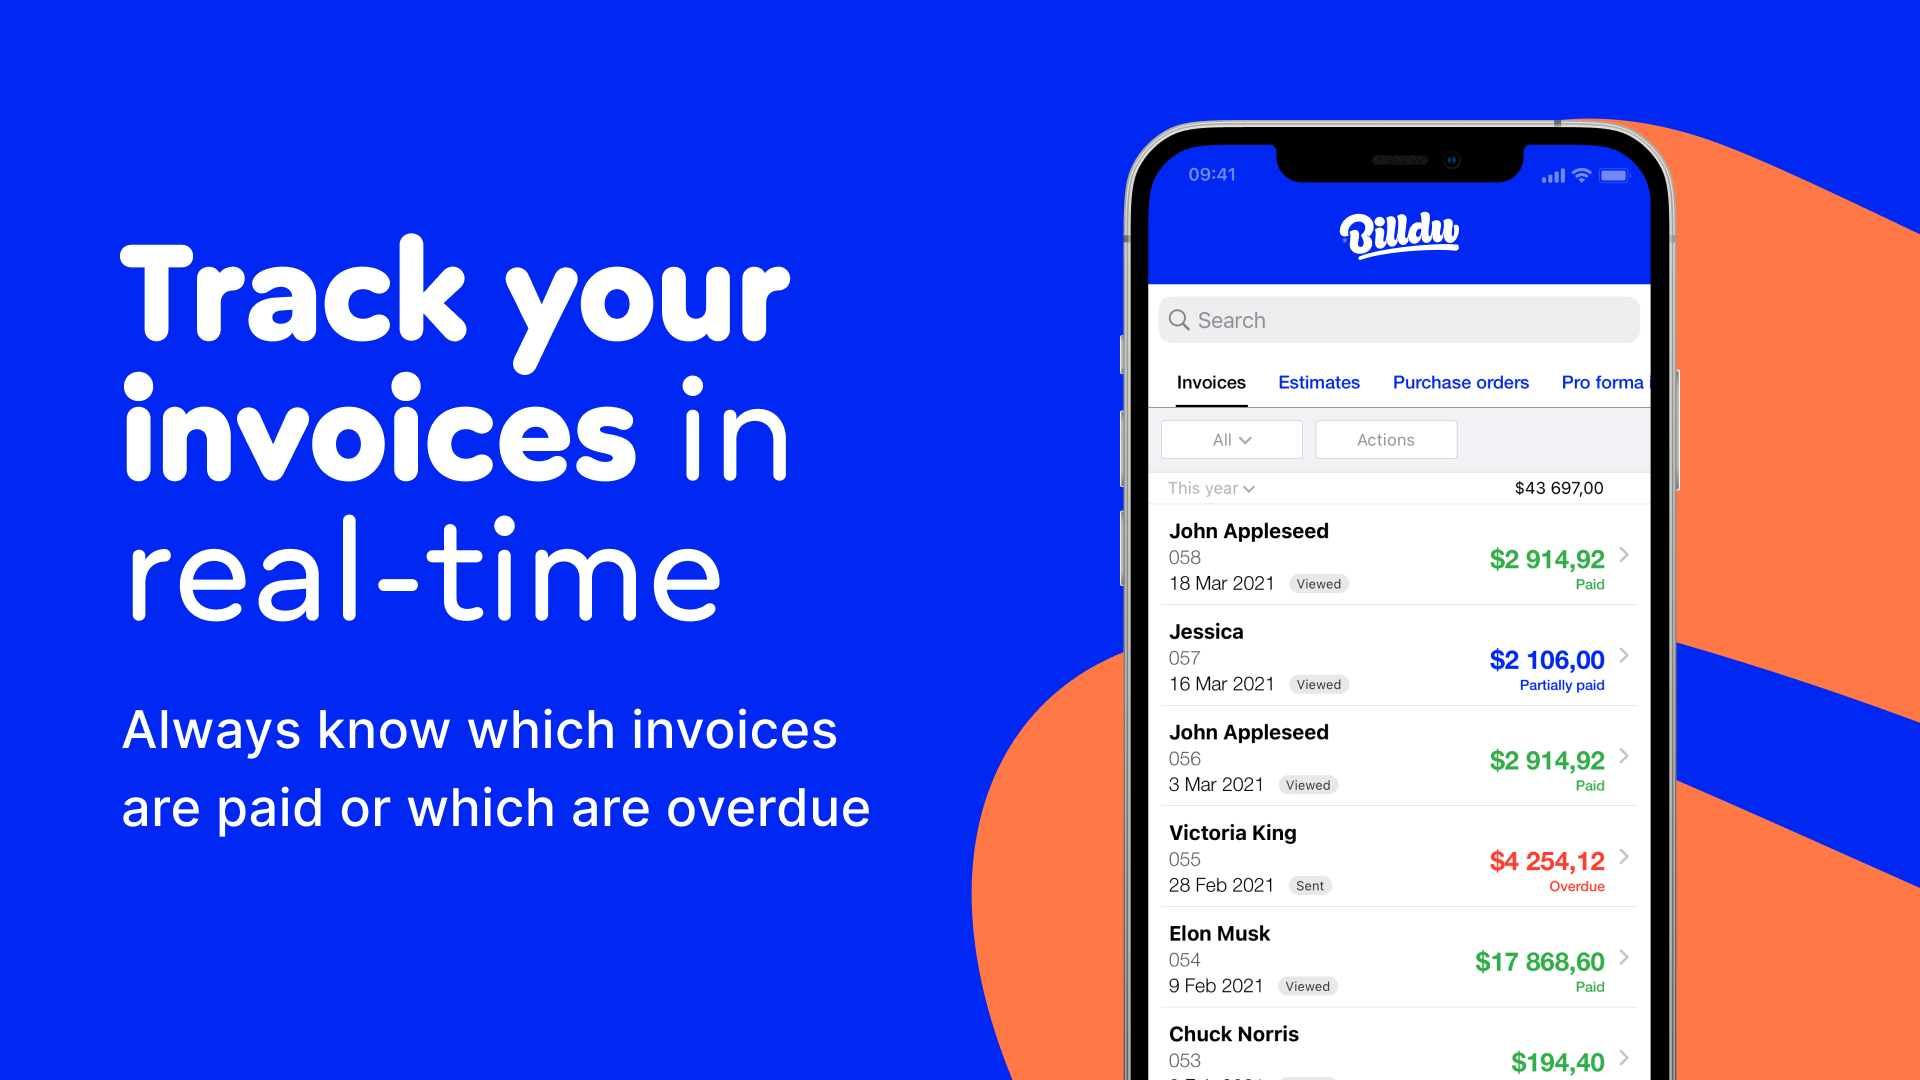 Track the status of your invoices in real-time.